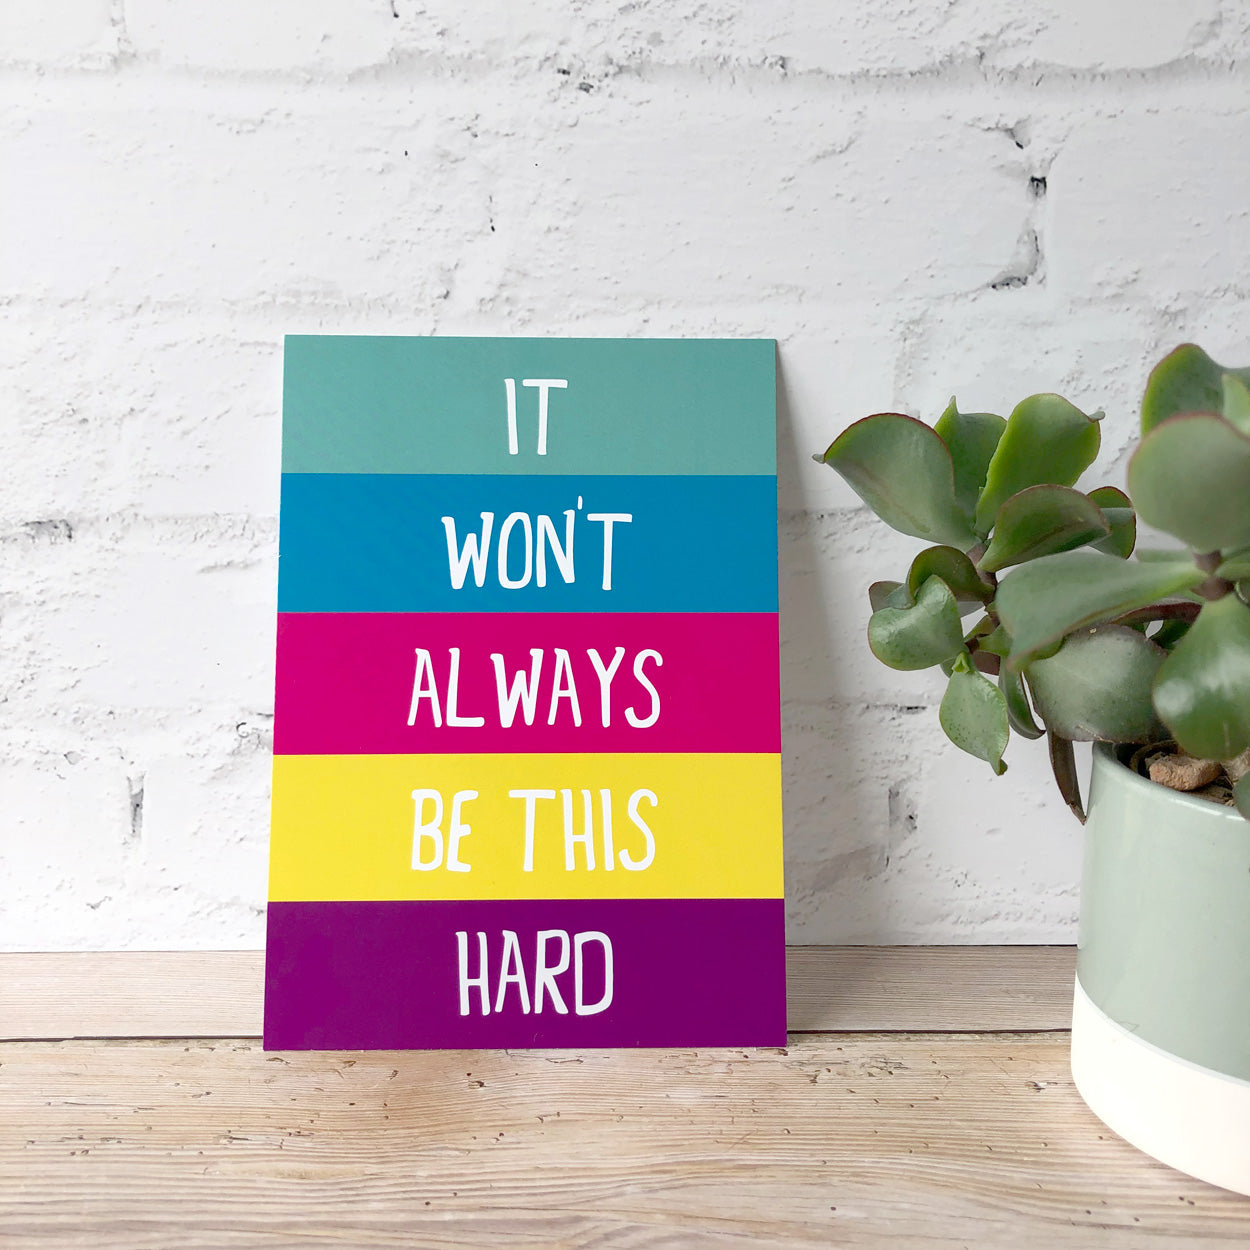 Encouraging Postcards | Inspirational Quotes Postcards